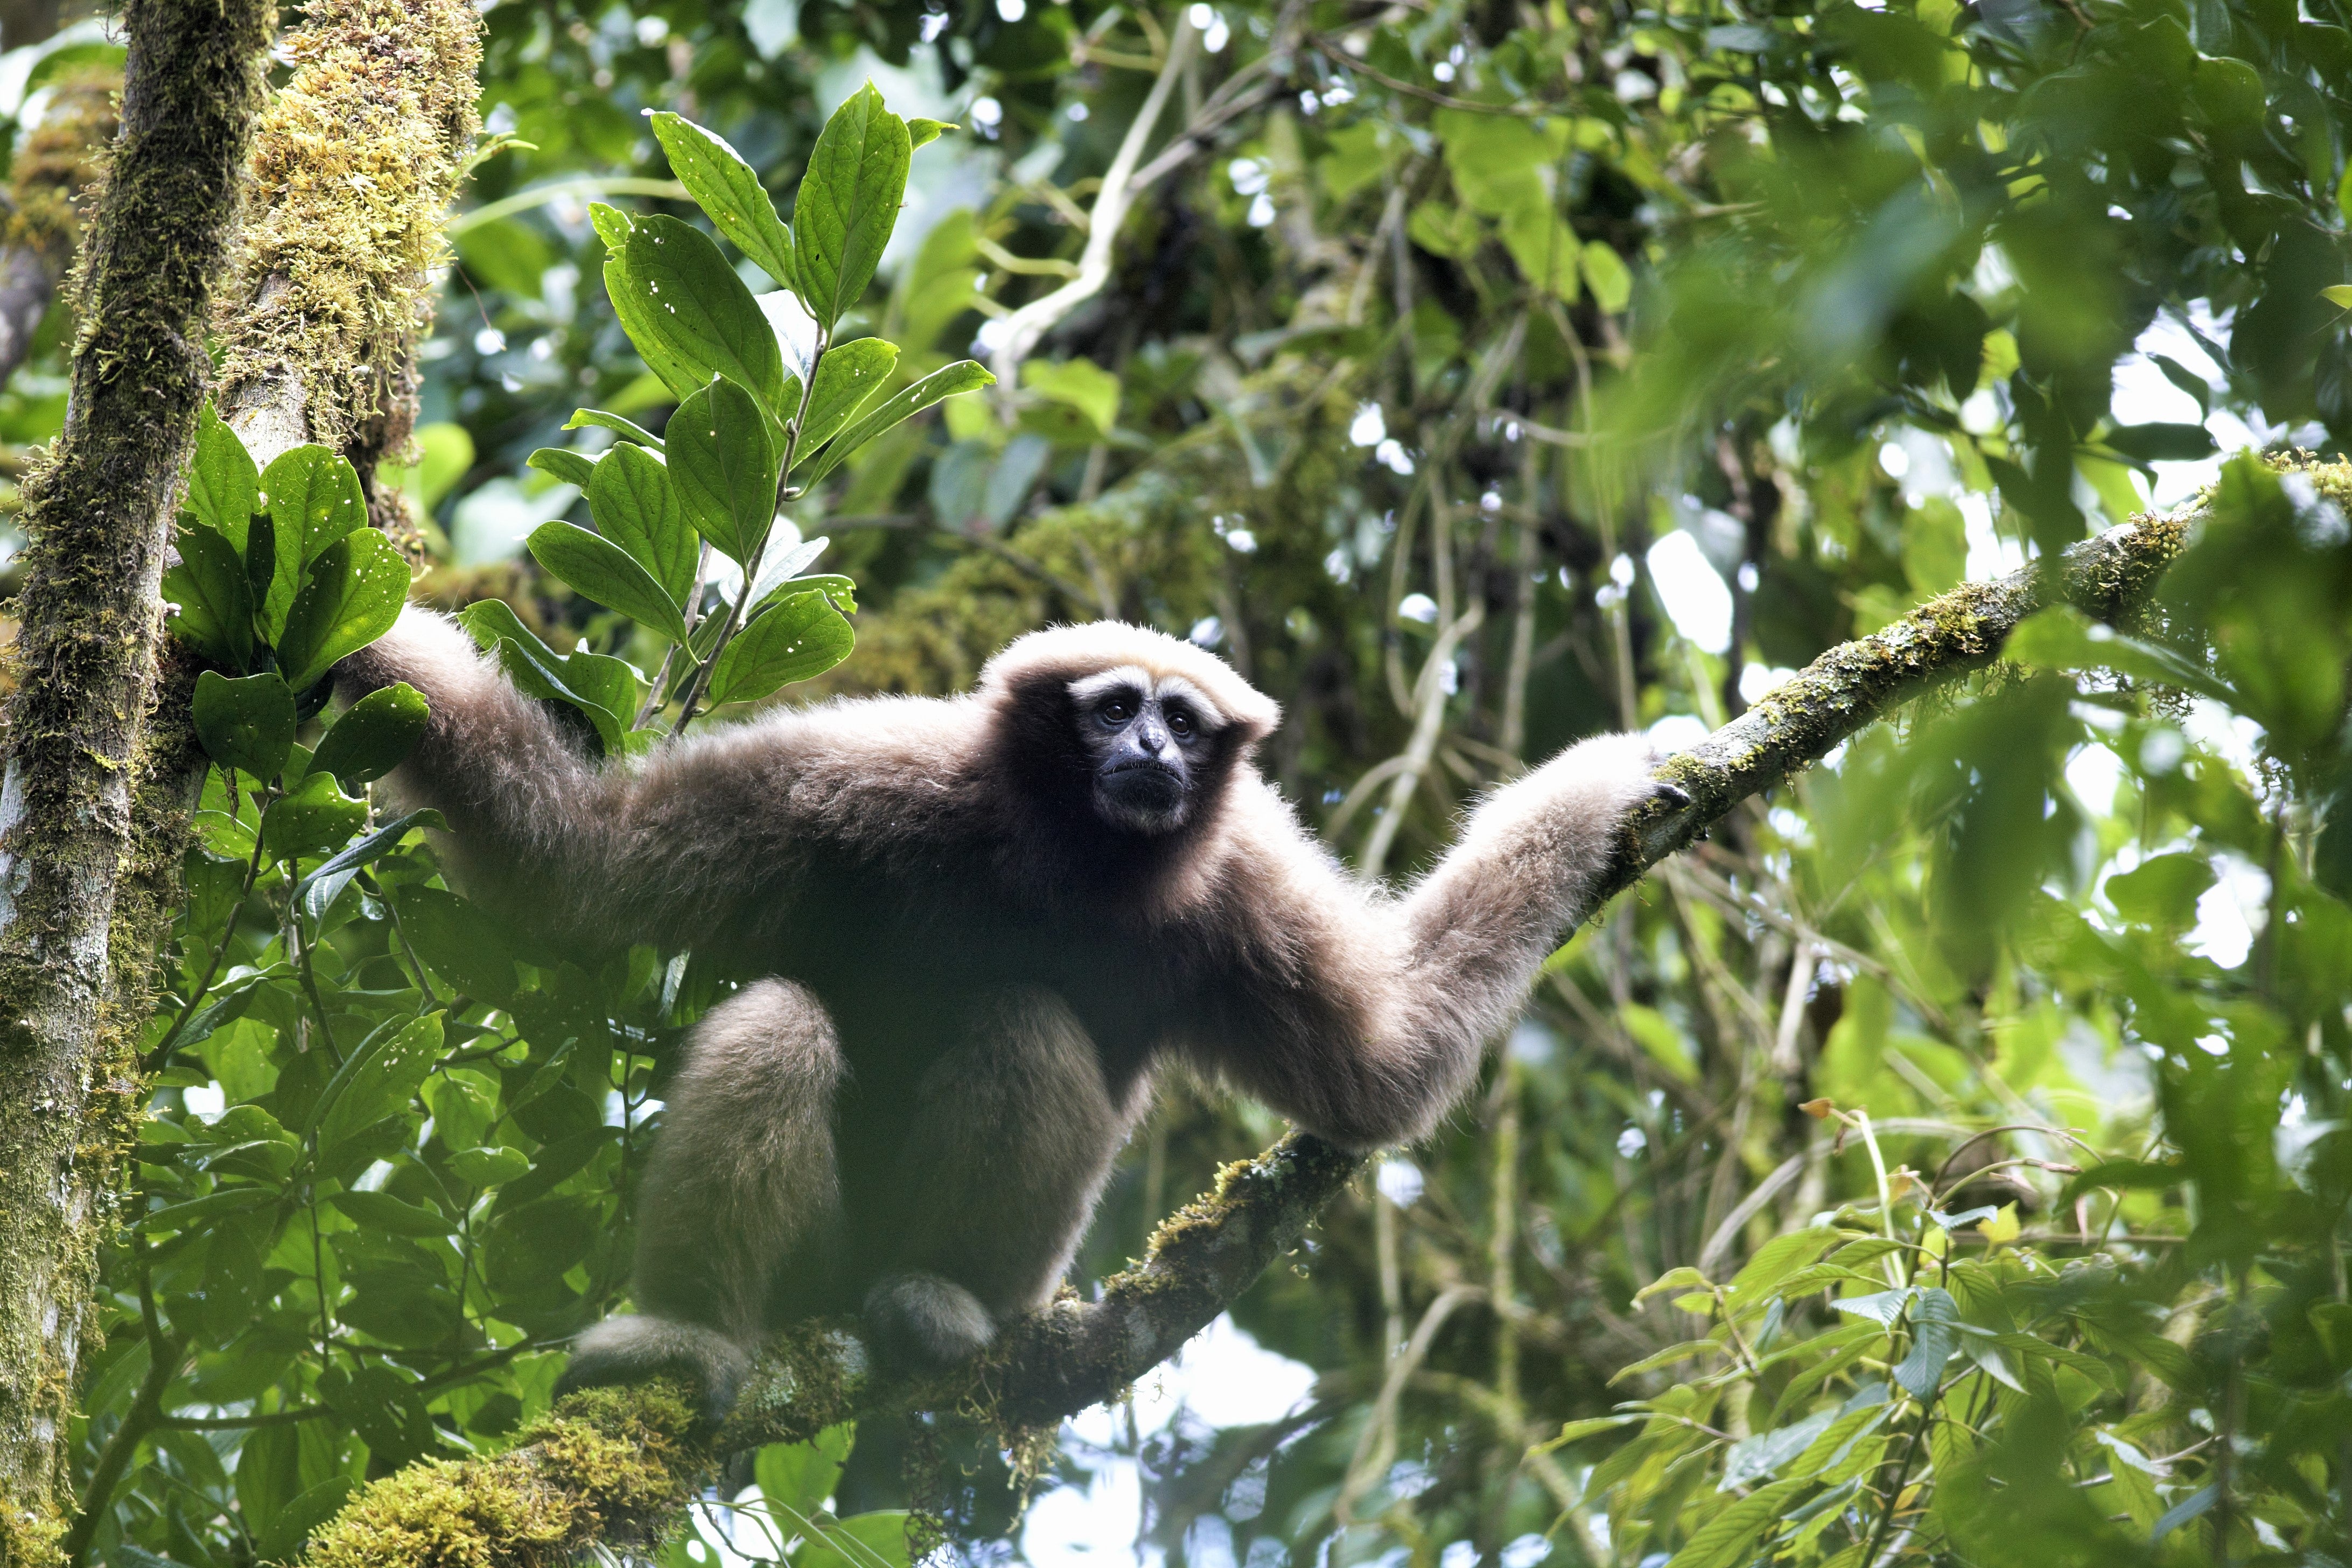 Adult female Skywalker gibbon looks into the forest while holding branches, arms outstretched.